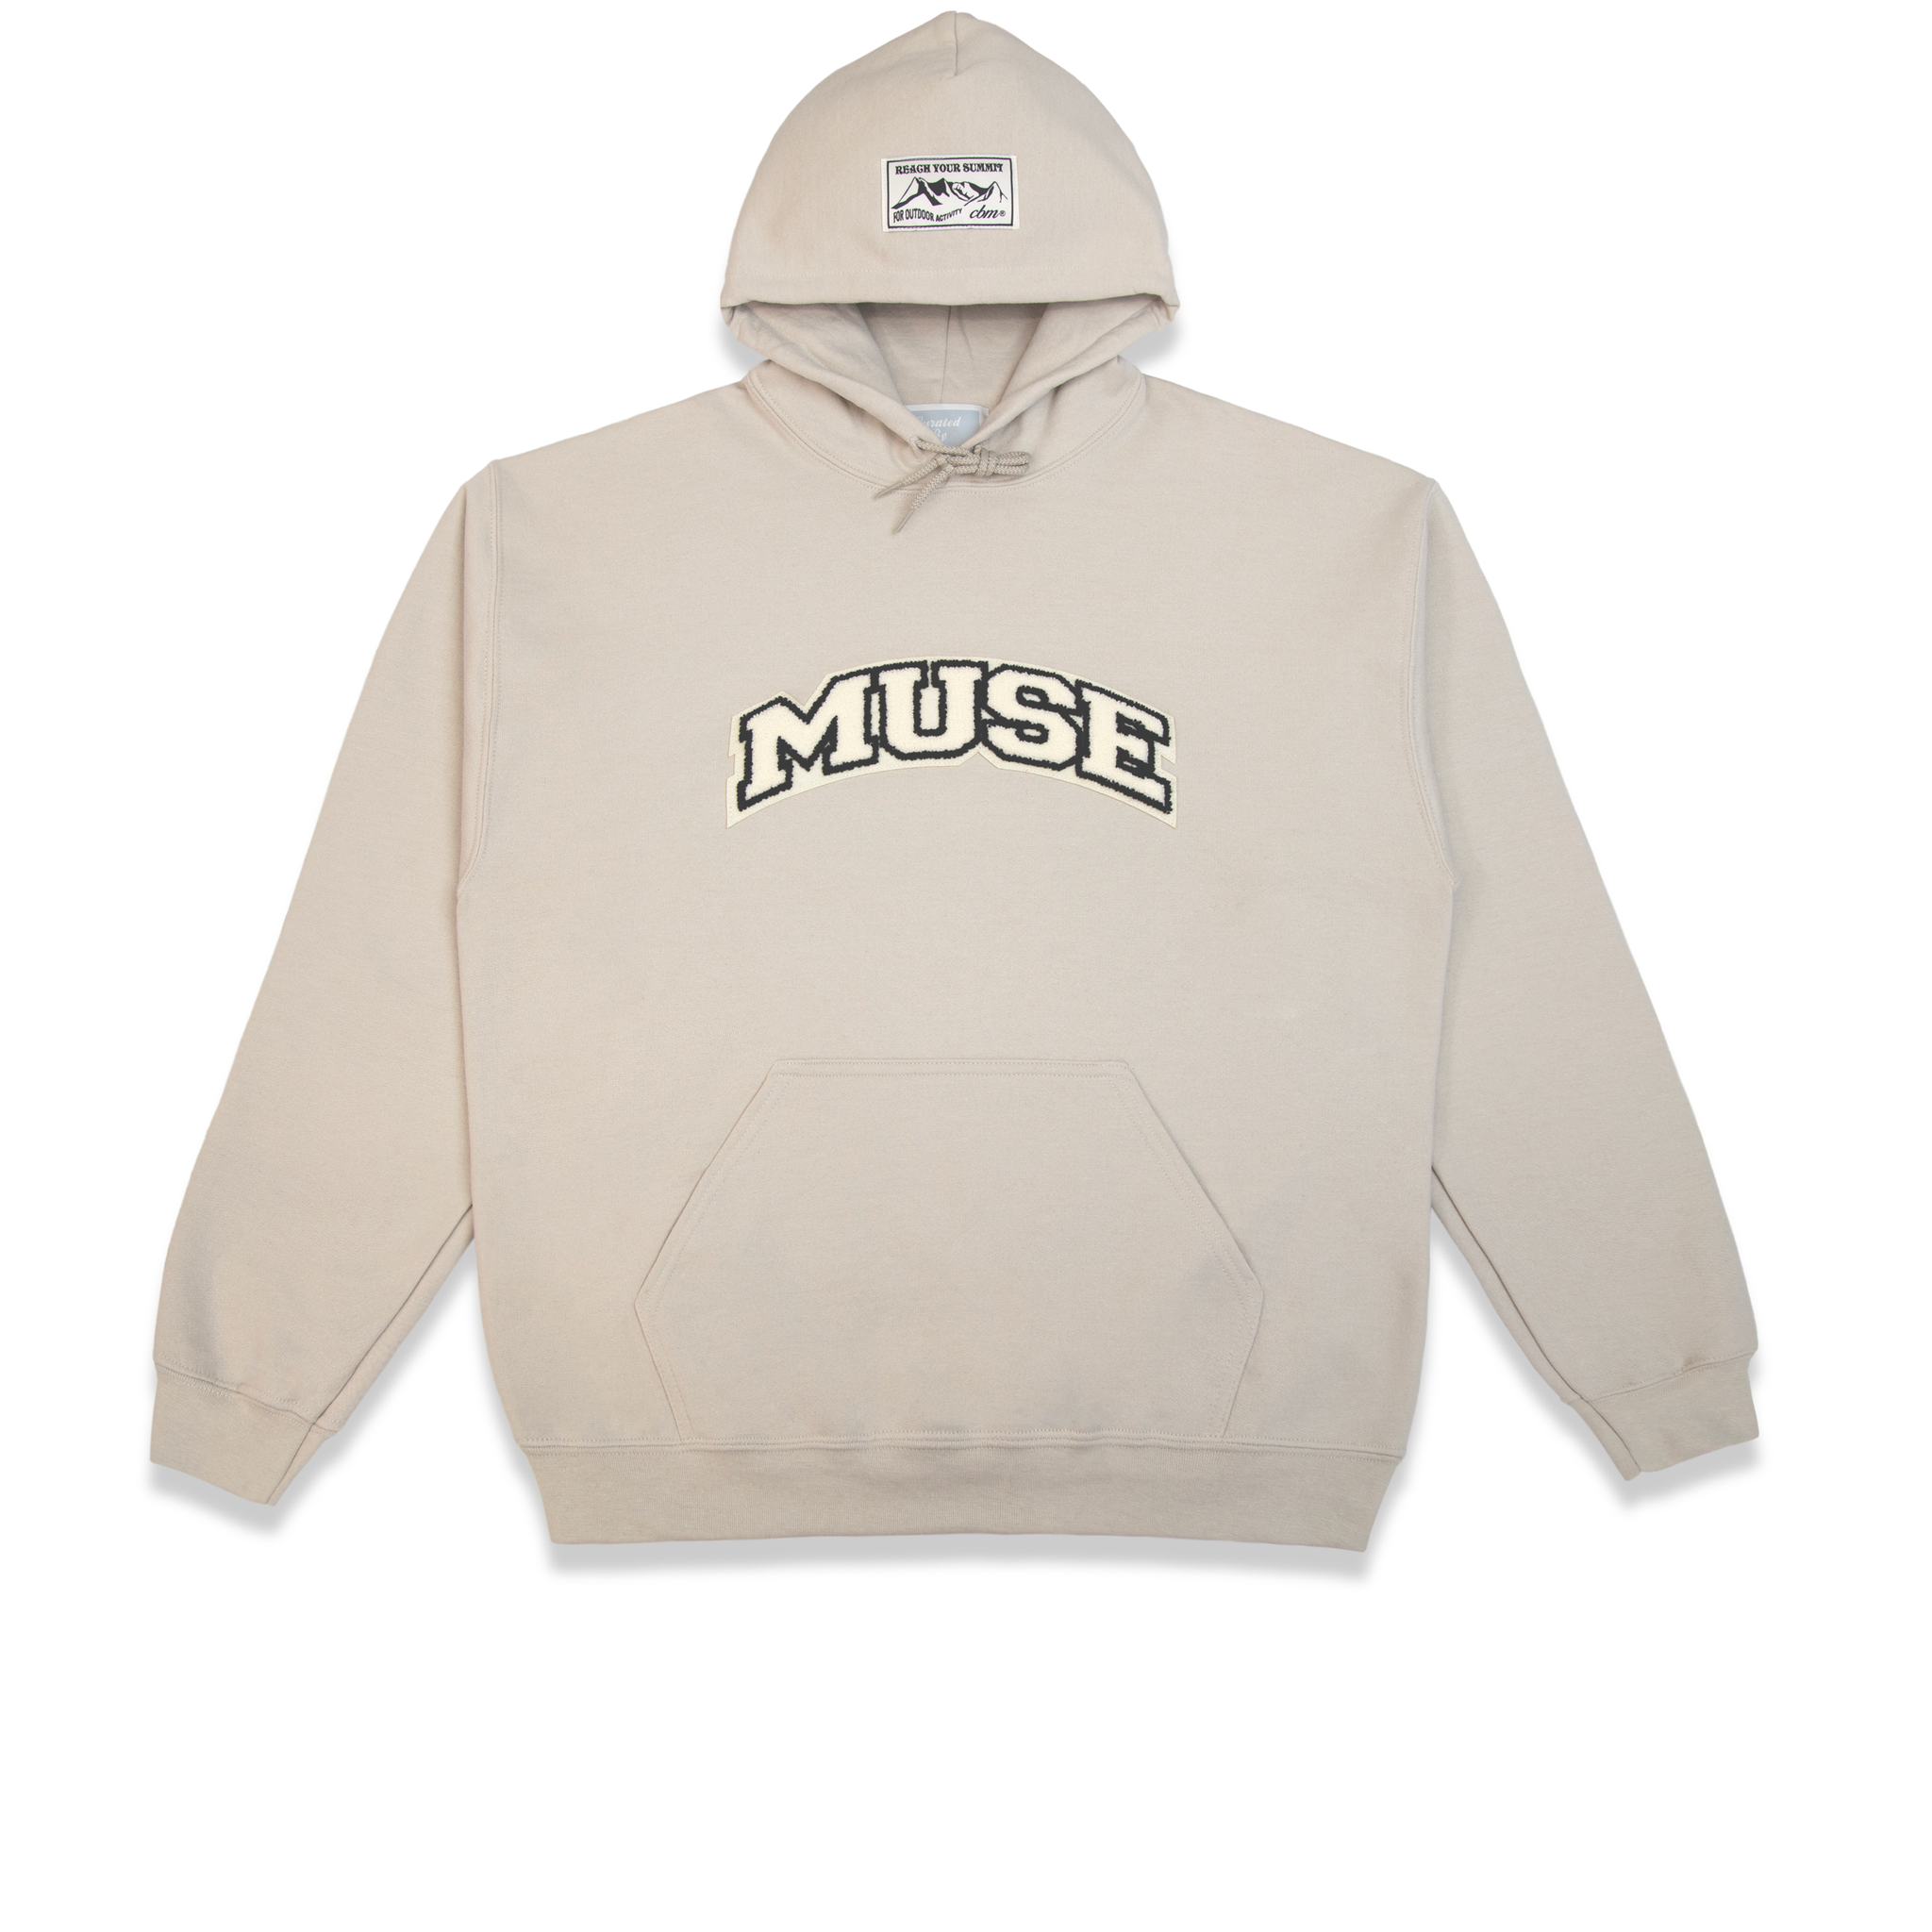 Find your muse! – Unisex Eco-Friendly Pullover Hoodie